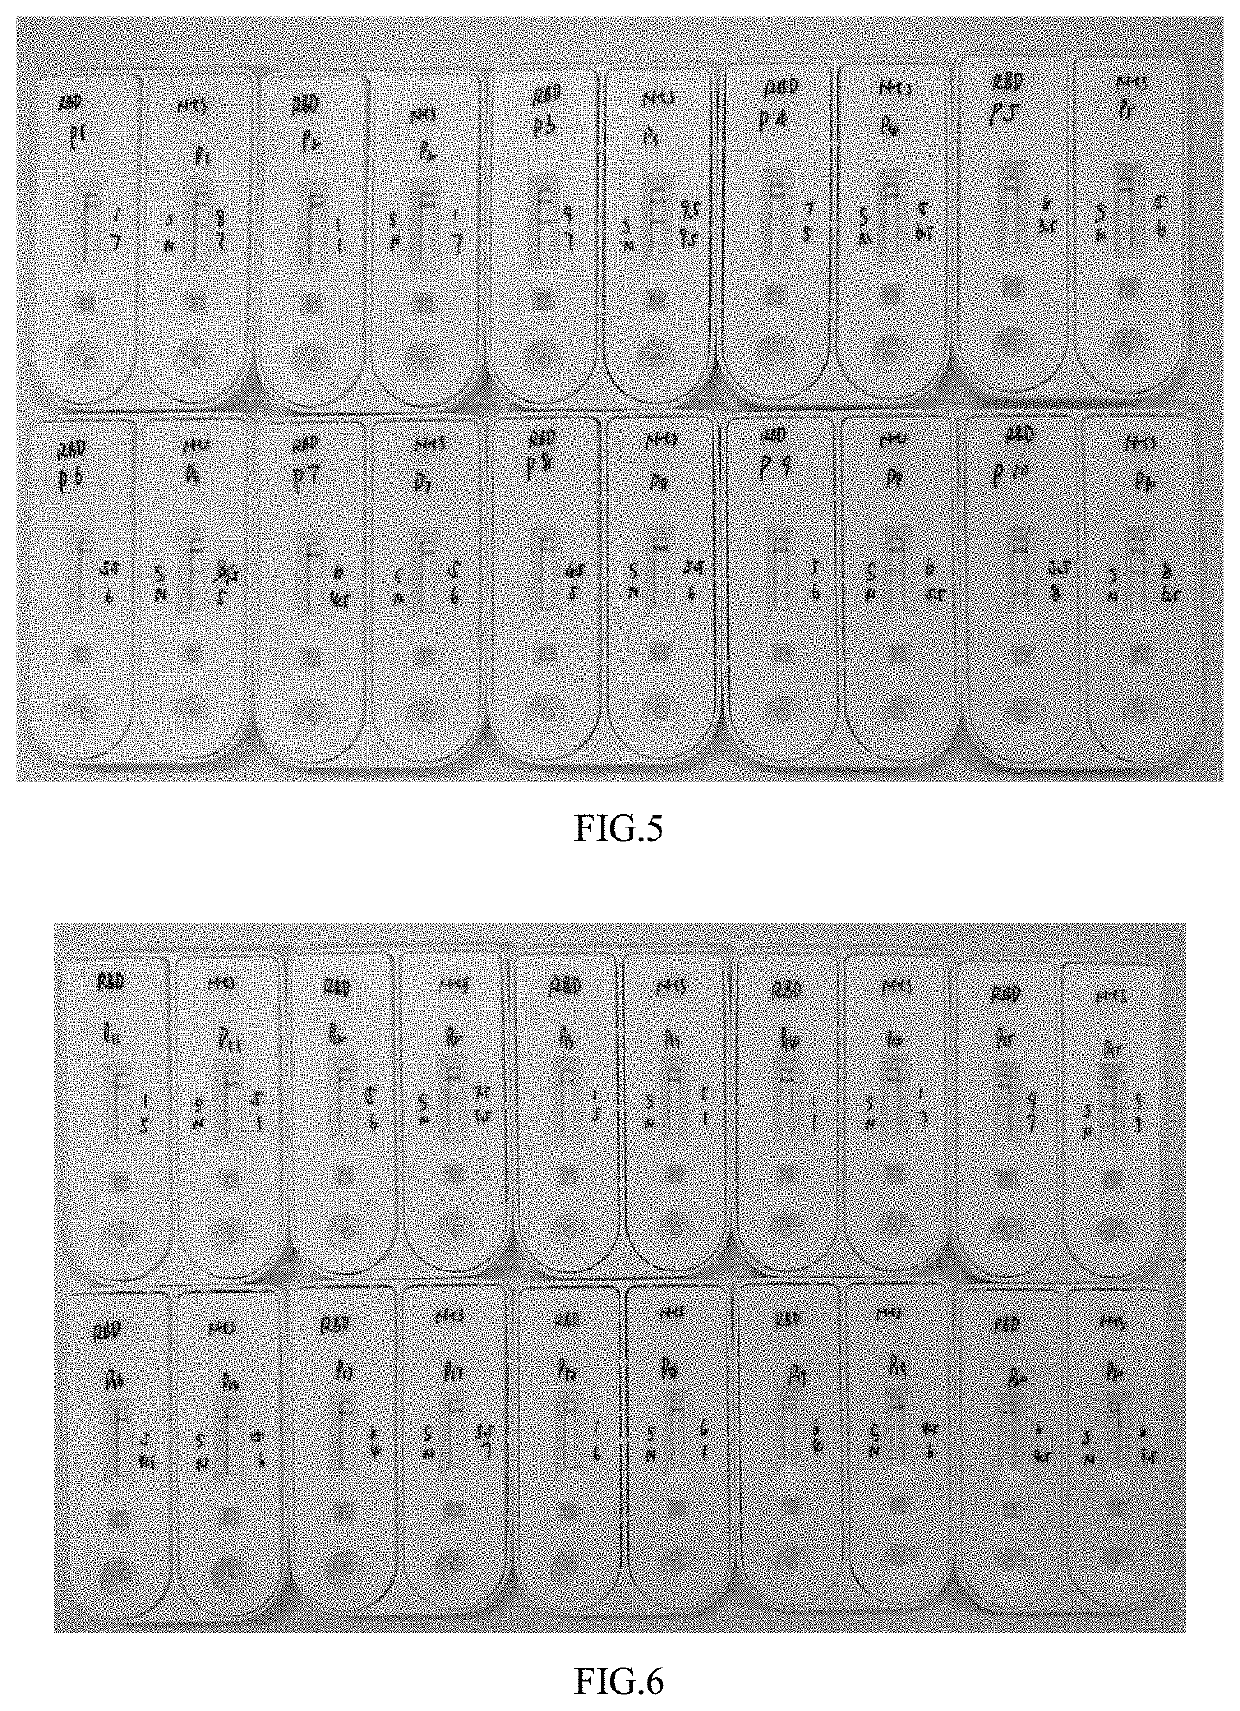 Lateral flow detection device for detecting a coronavirus by immunoassay